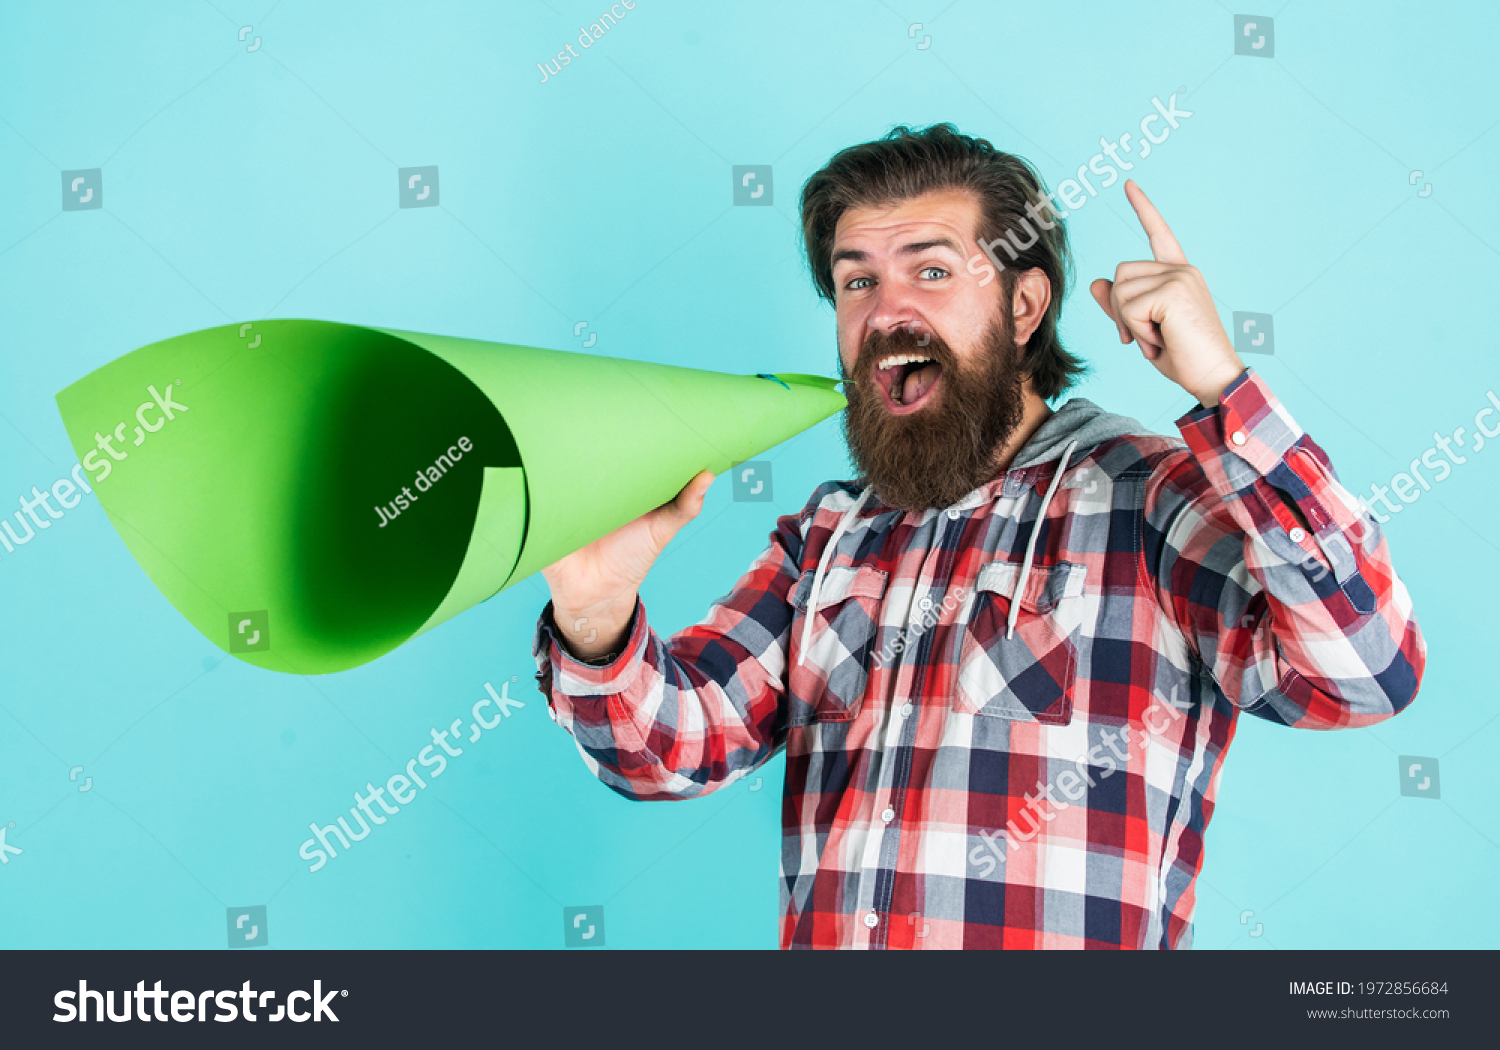 Freedom of press. Activist speaks at rally. Make it heard. oratory and rhetoric. mature crazy mad man pose with megaphone. announcement concept. stop being silent. hipster screaming in the megaphon #1972856684